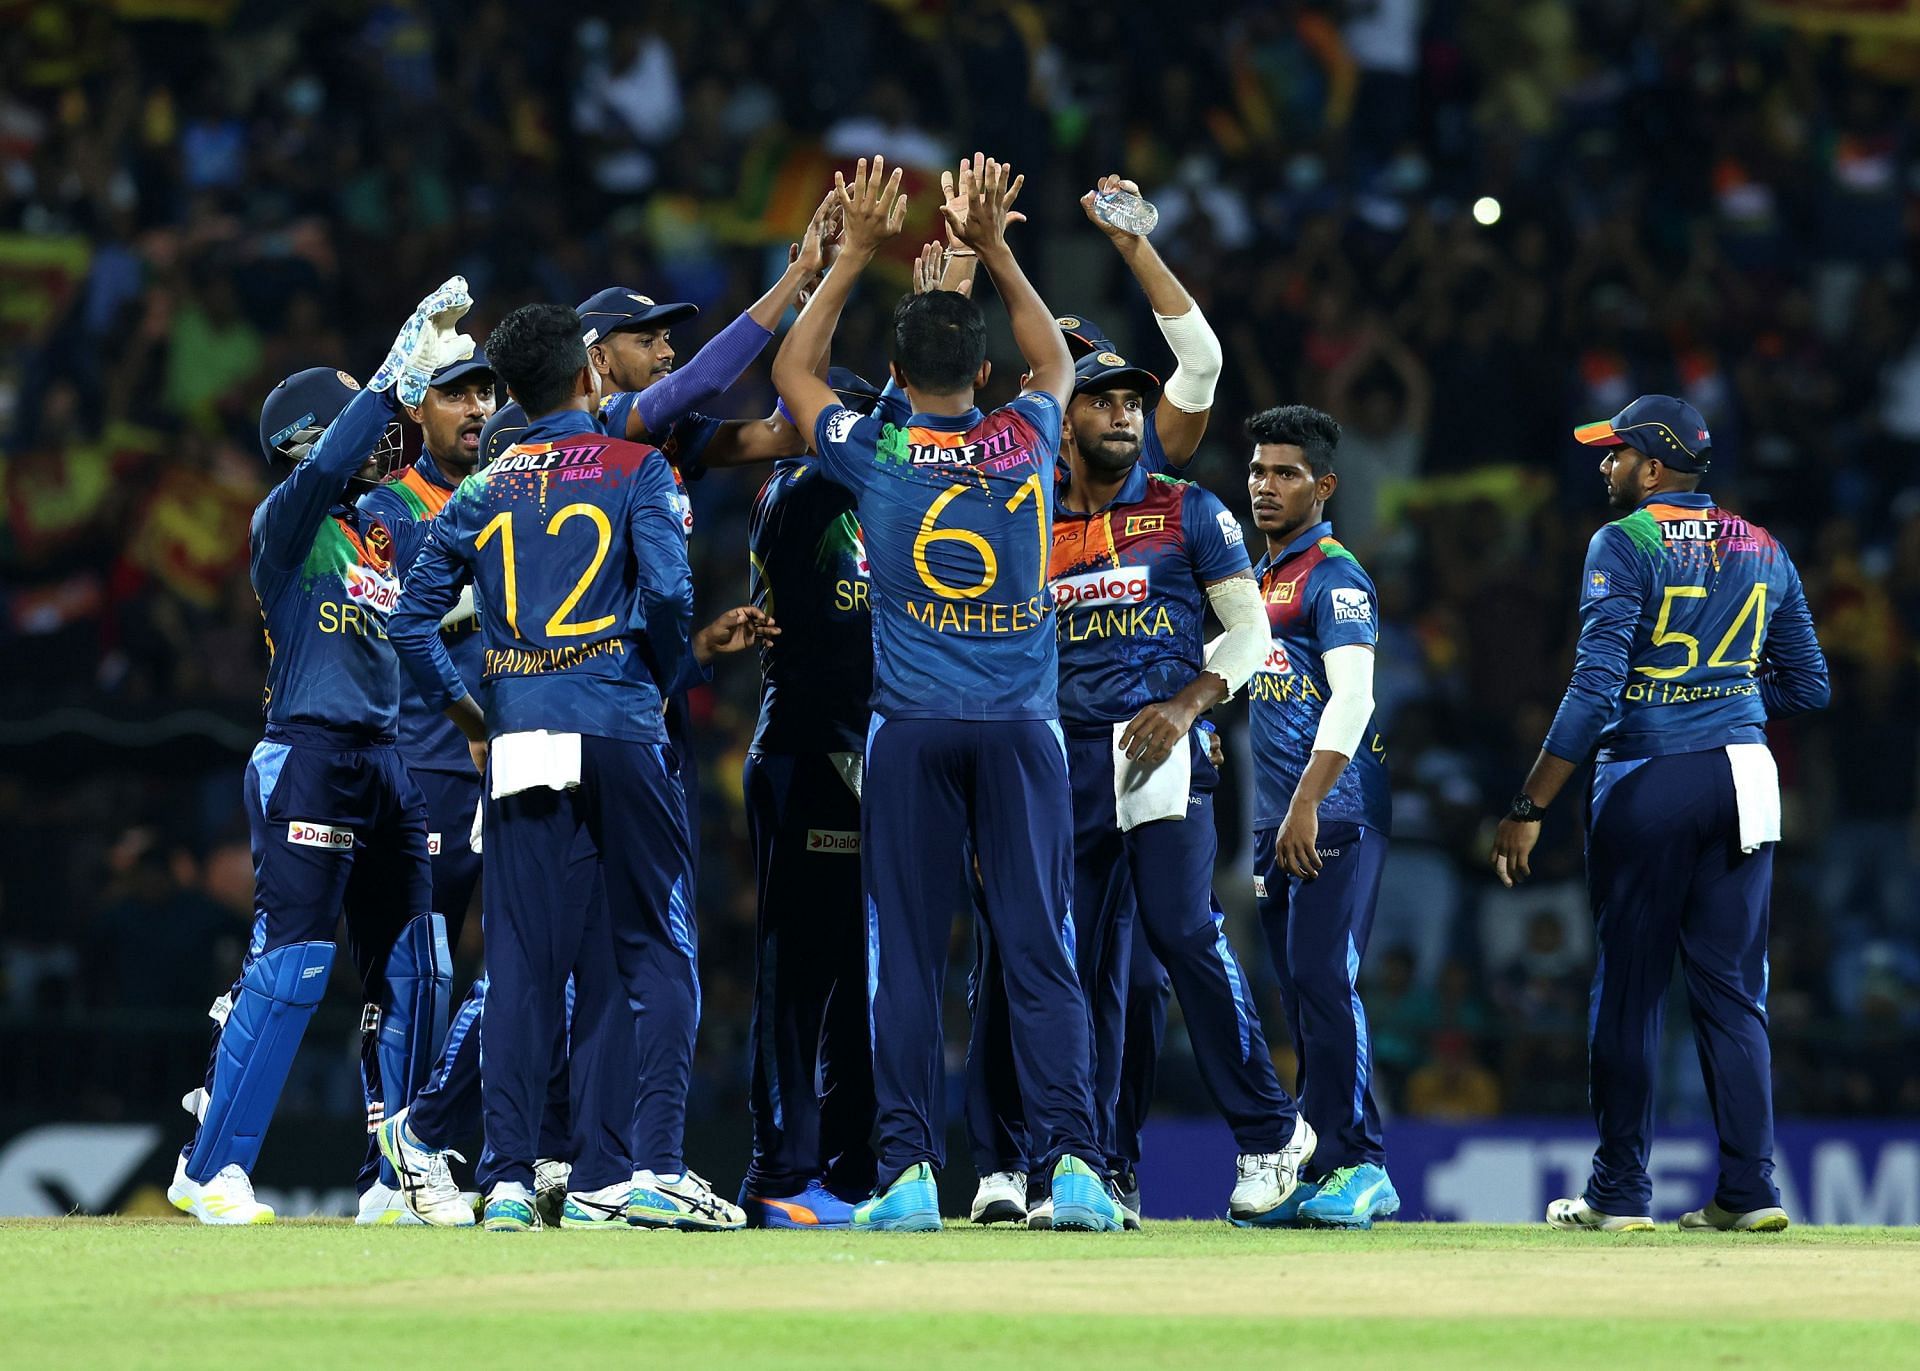 Sri Lanka Asia Cup 2022 schedule Full list of Sri Lankas matches in Asia Cup, timings in IST and live streaming details